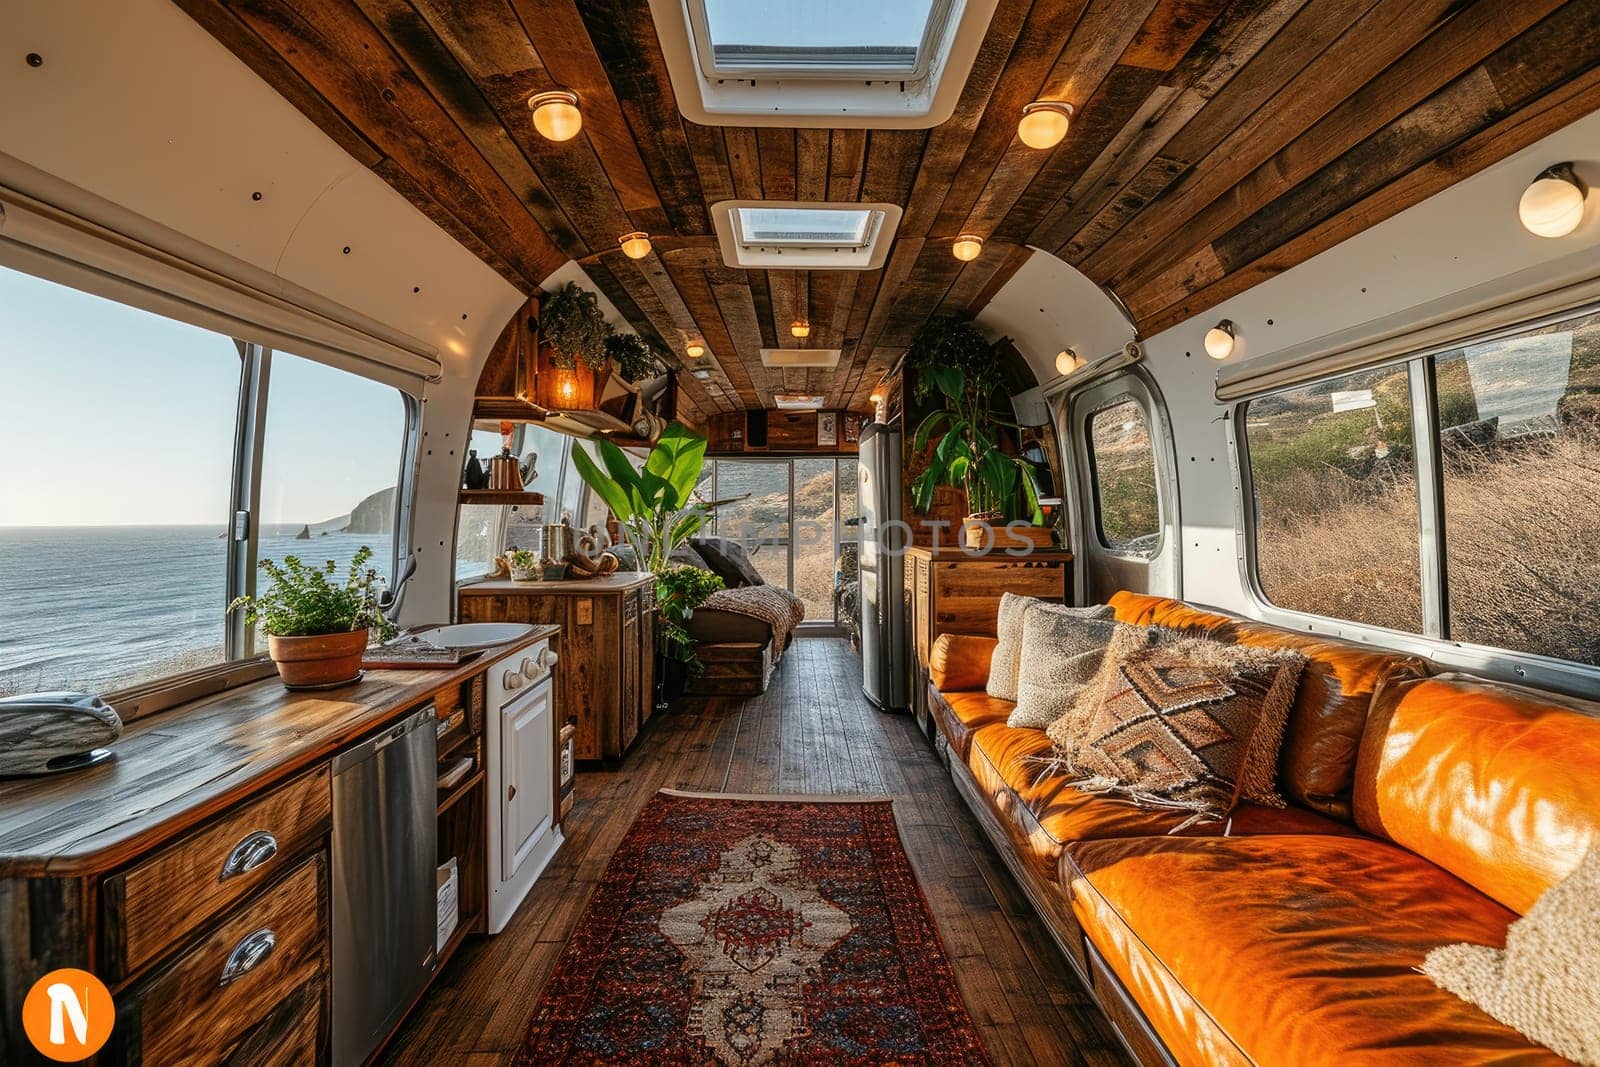 Photo of a cozy travel trailer designed to provide a comfortable and memorable experience while adventuring on the roads. by Yurich32